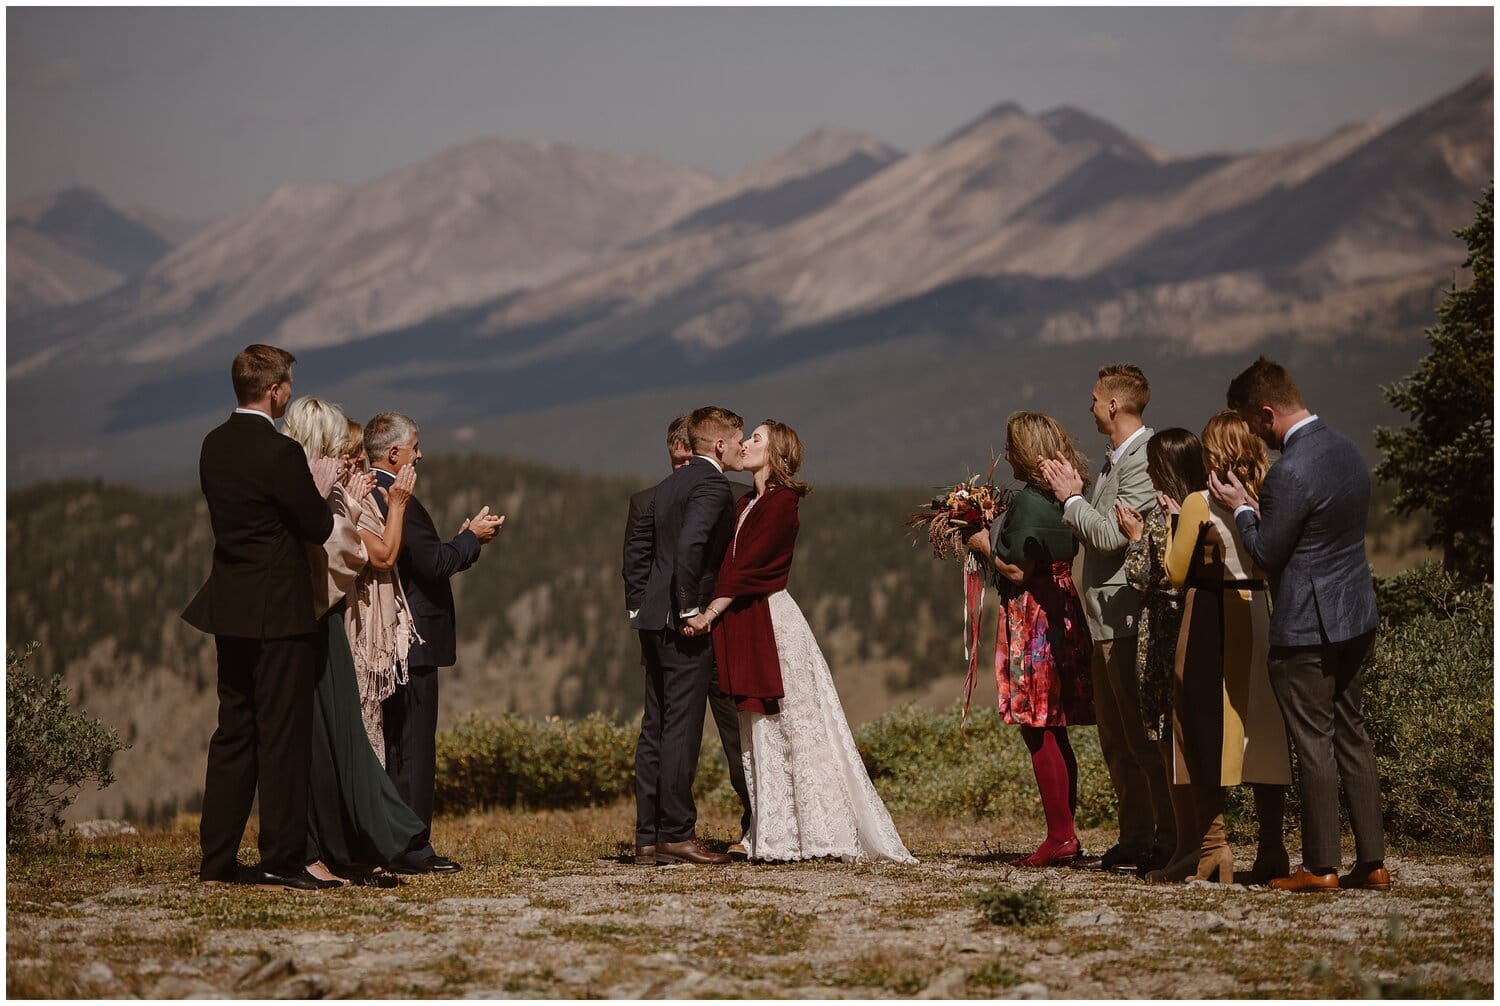 Bride and groom kiss while their families surround them during an intimate ceremony, with mountains in background, in Buena Vista Colorado. 